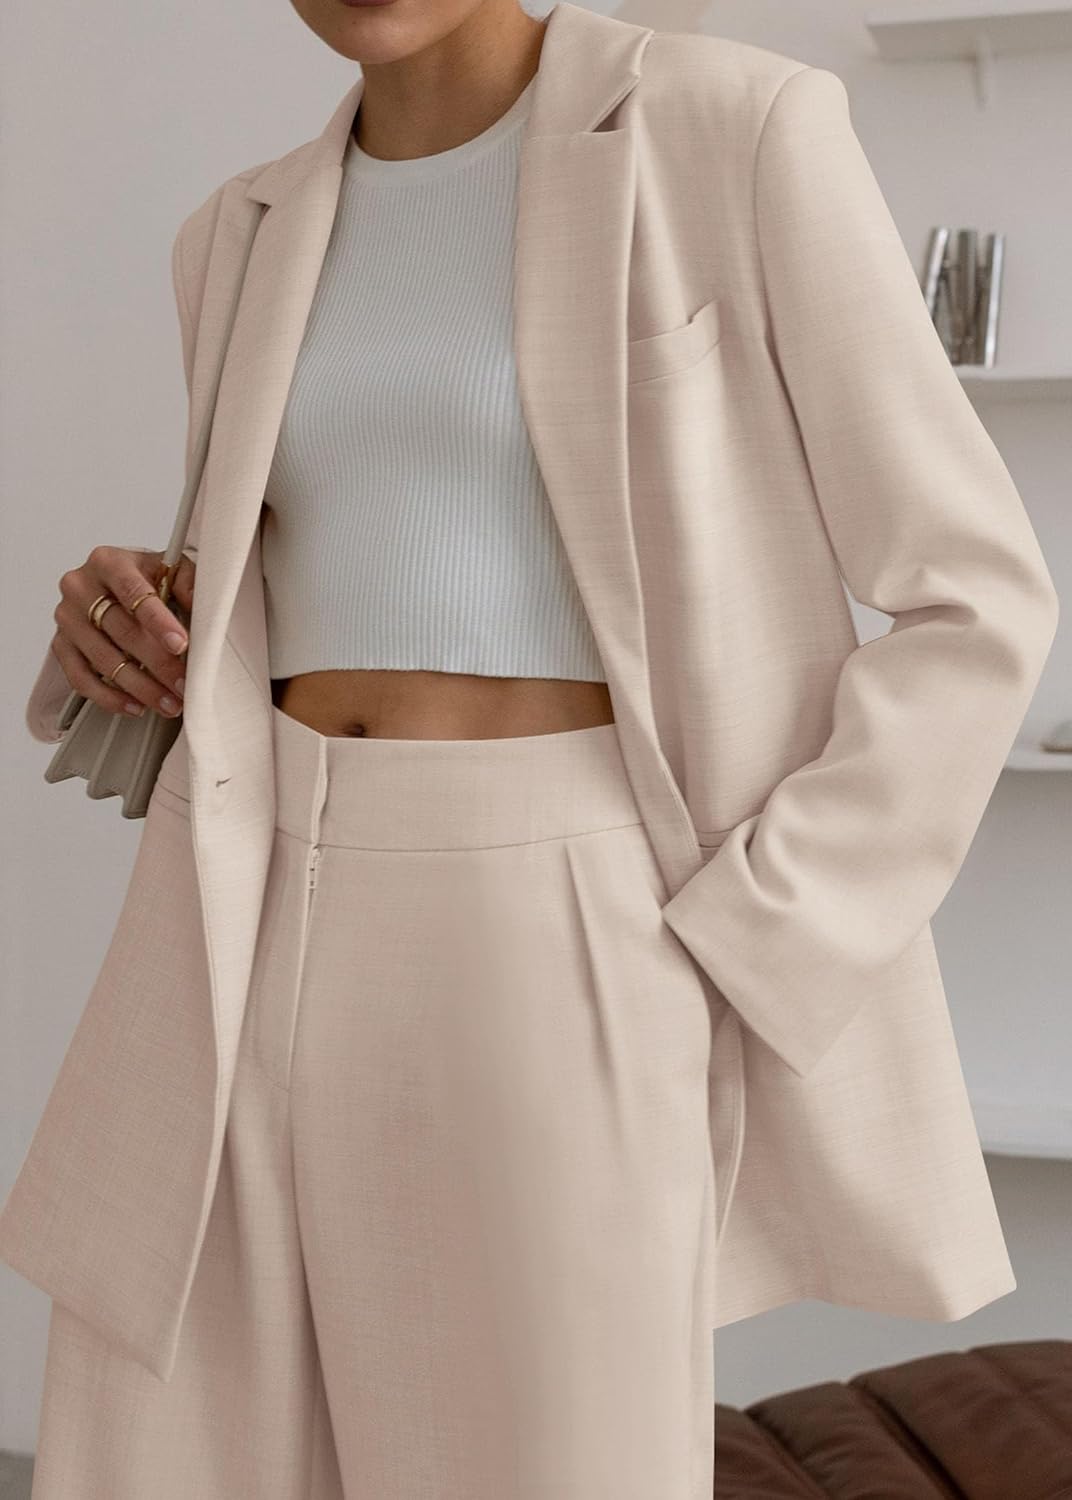 Bella Womens Office White Pink Suit With Elegant Blazer And Pantsuit Casual  Loose Pants Jacket For Work And Formal Occasions Style 221006 From Luo02,  $41.3